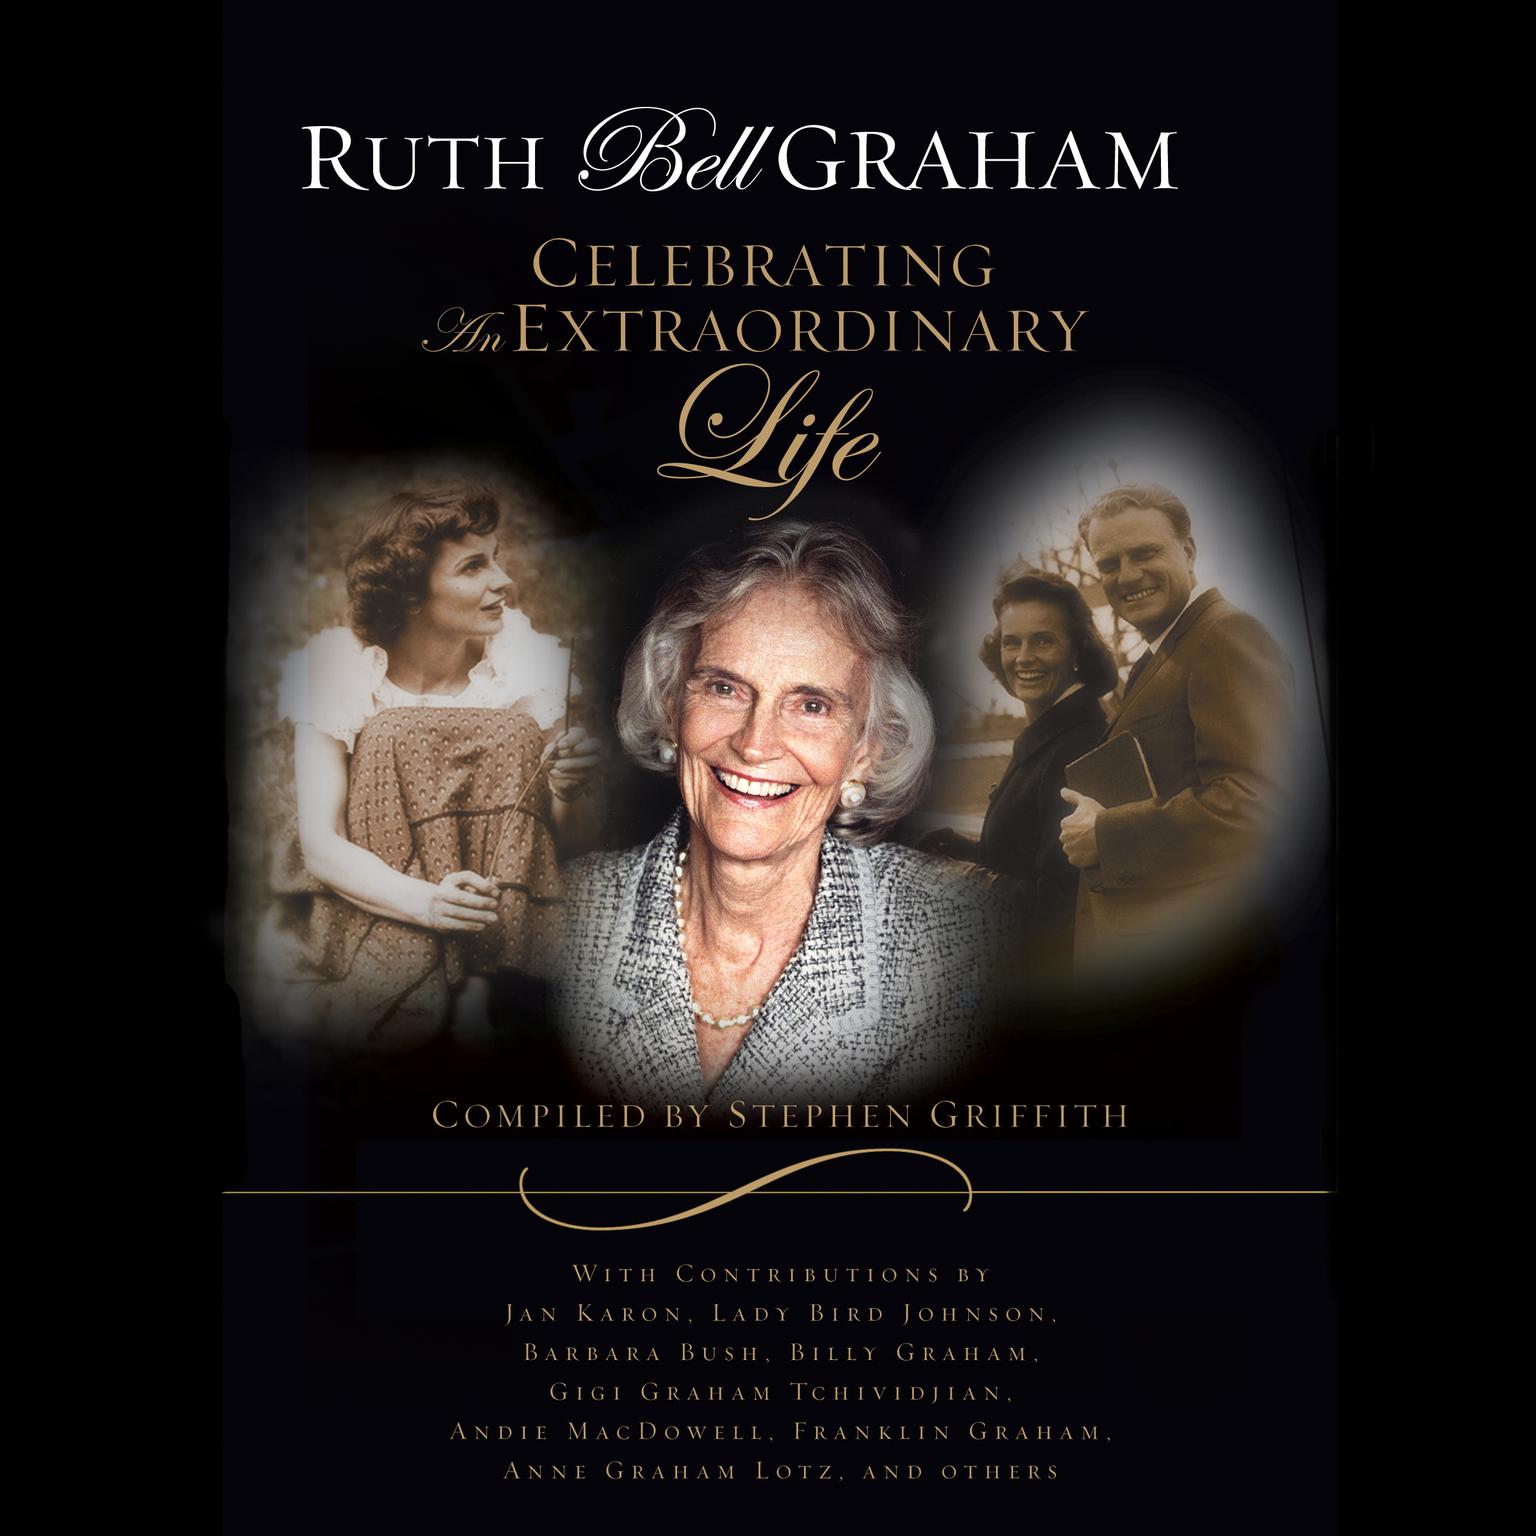 Ruth Bell Graham (Abridged): Celebrating an Extraordinary Life Audiobook, by Stephen Griffith